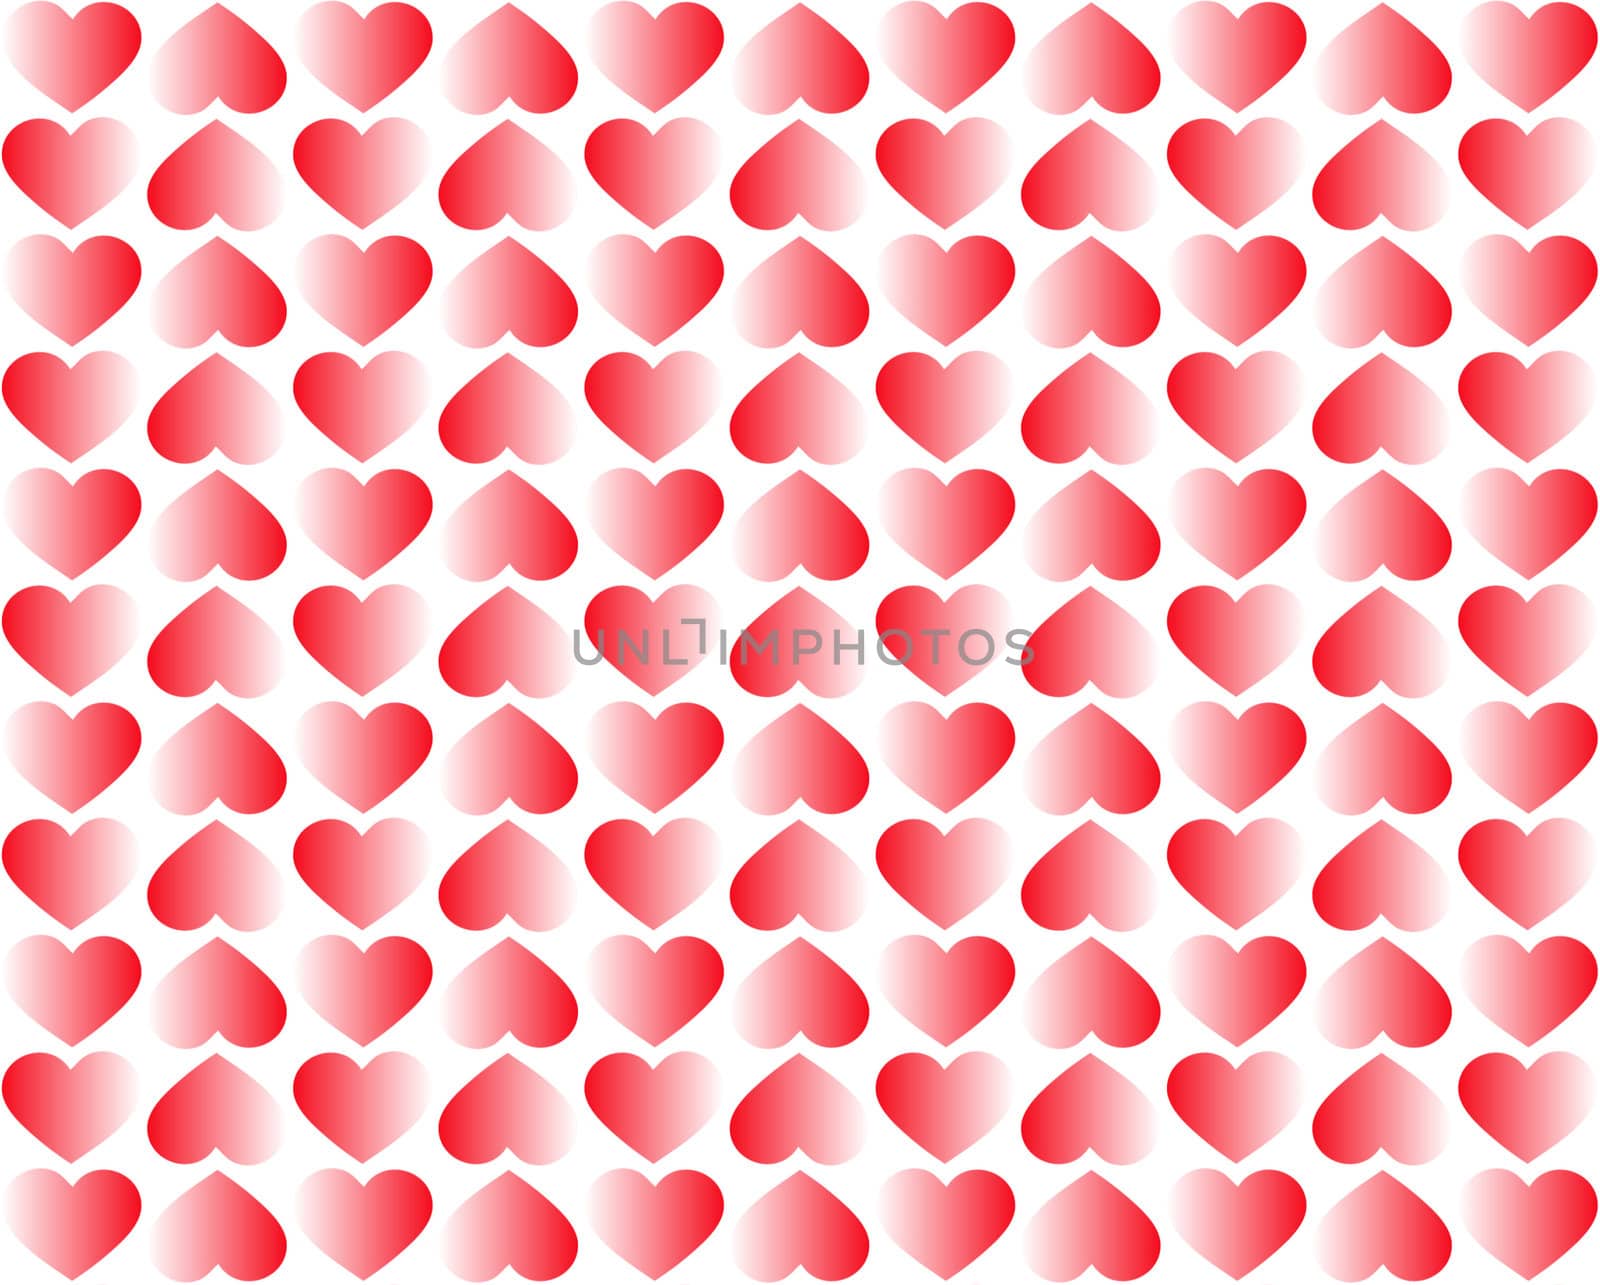 Red Hearts as a background pattern